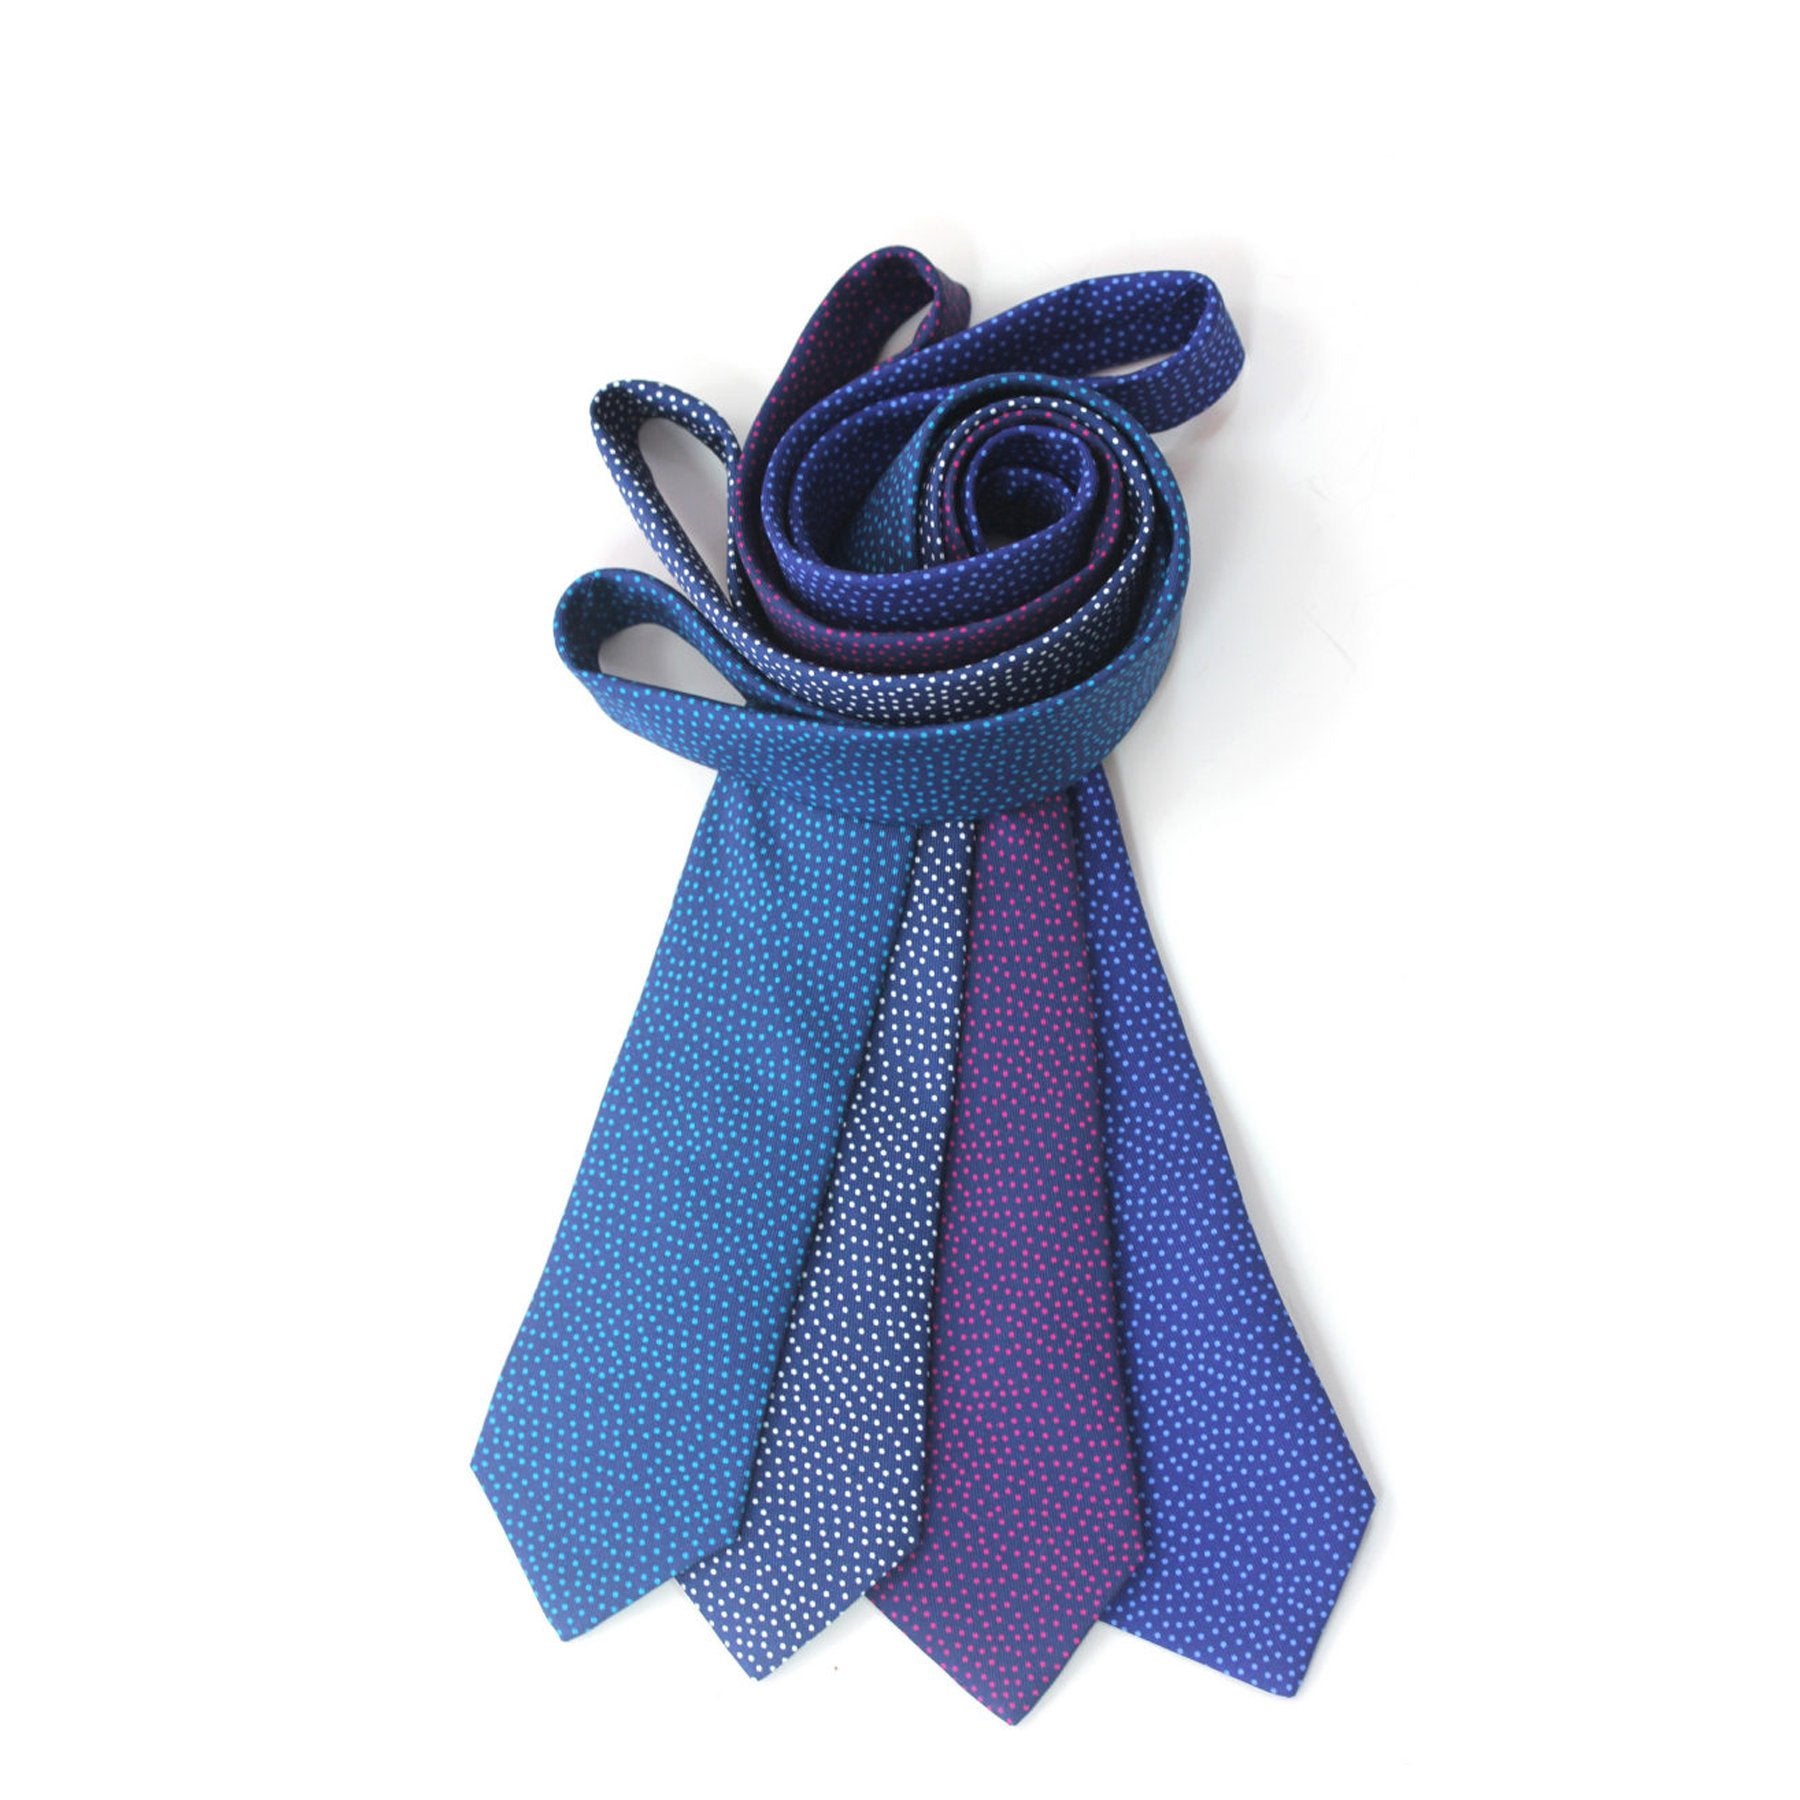 Our new Spring Silk Ties, handmade in England - Emma Willis